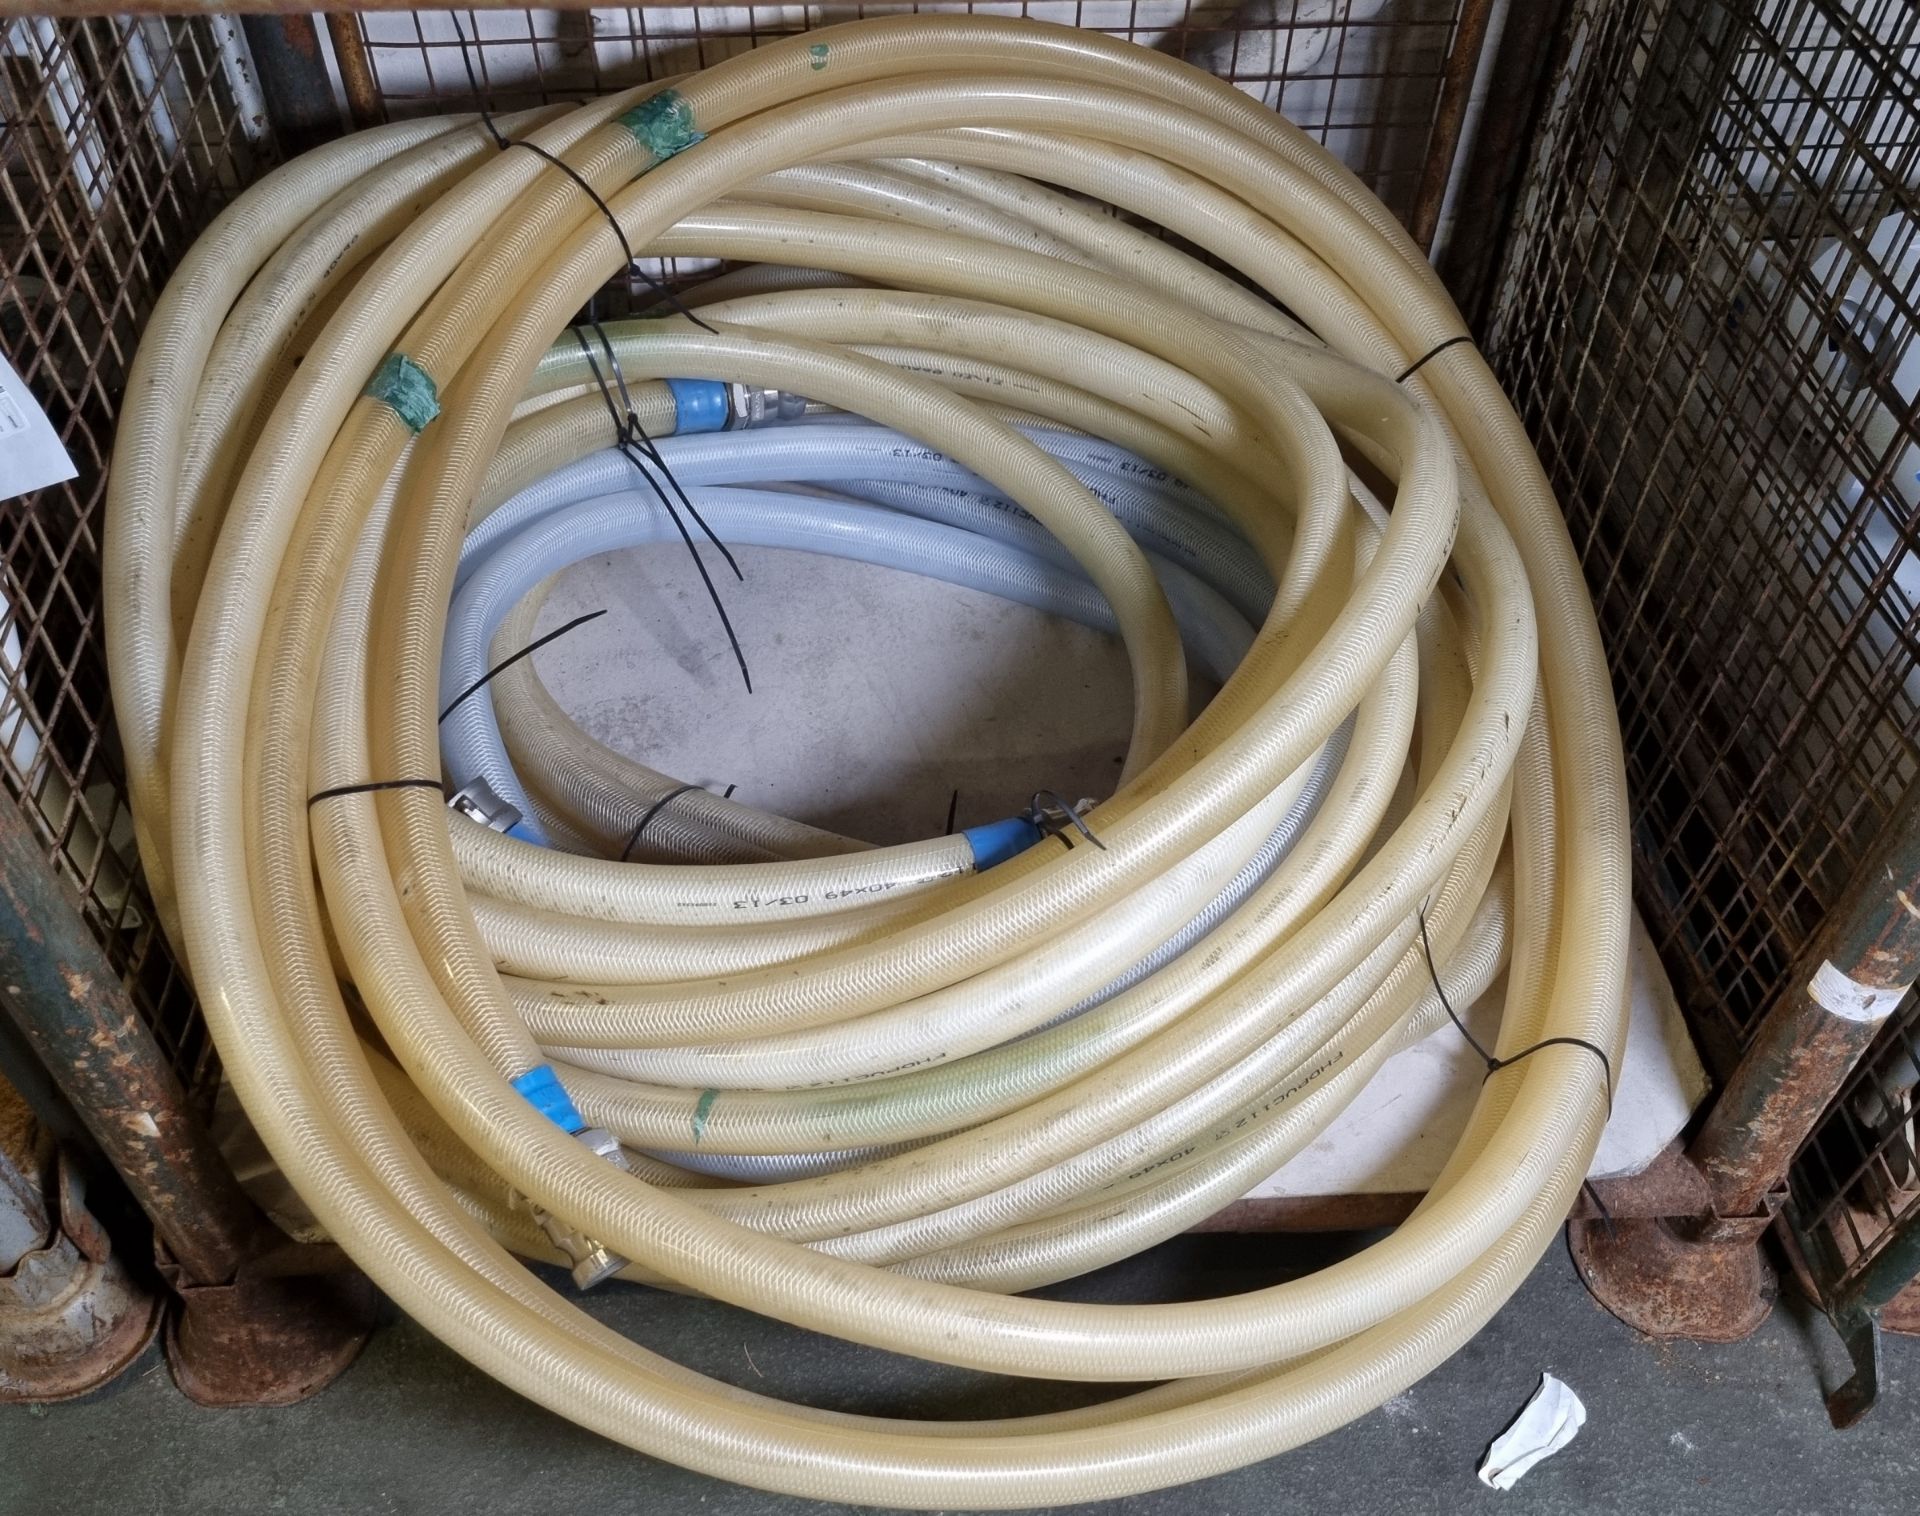 4x Flexible heavy duty hoses with couplings - Unknown length - Image 3 of 3